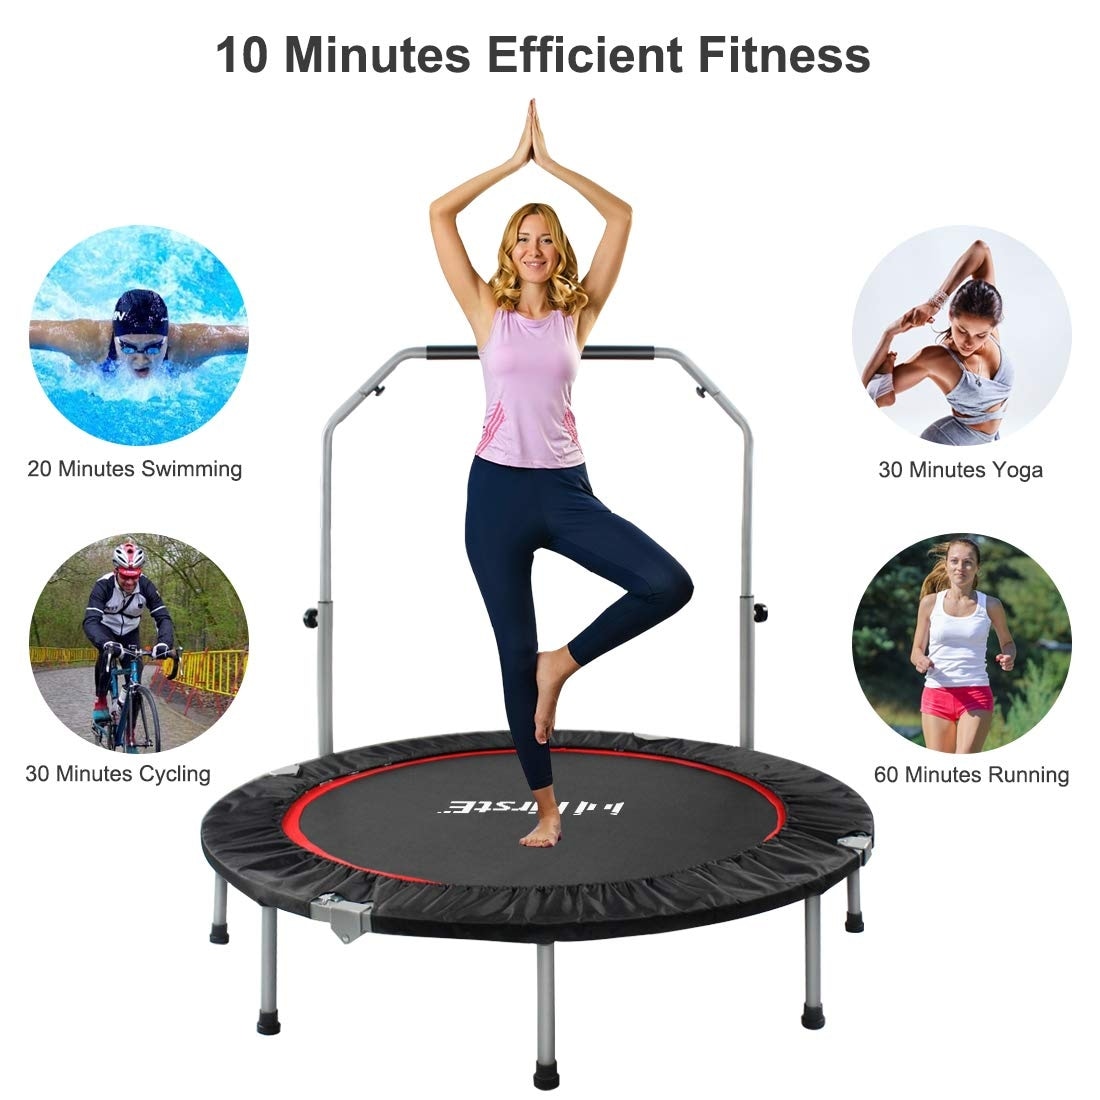 48 Foldable Fitness Trampolines with Adjustable Heights Foam